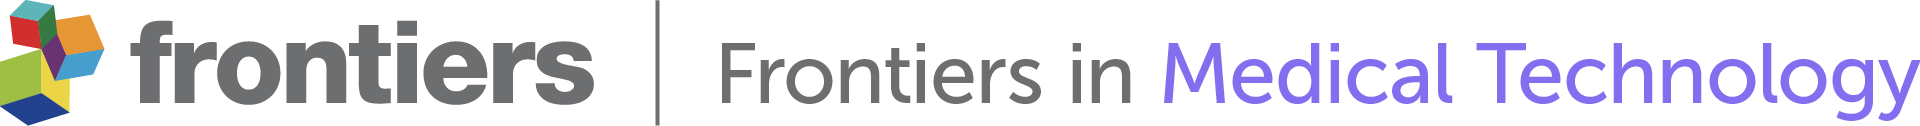 Silver sponsor logo for Frontiers in Medical Technology